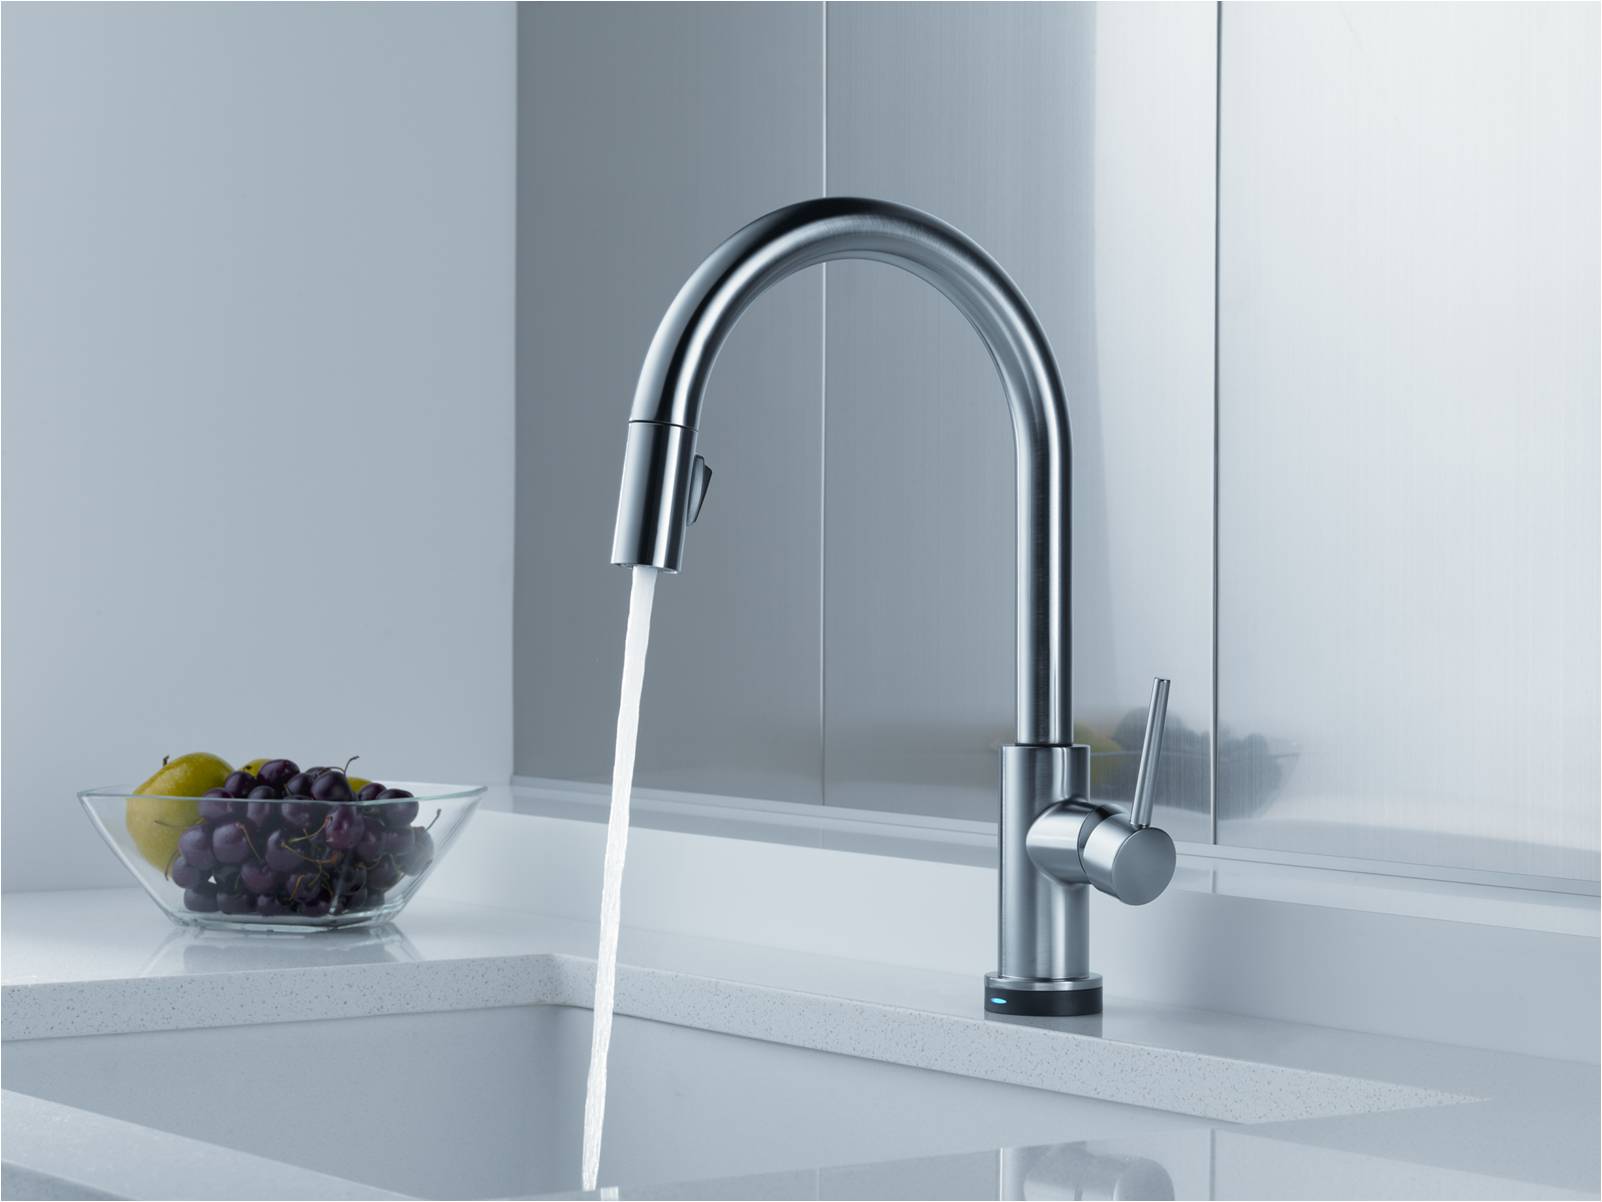 The Trinsic Kitchen Faucet From Delta Is Just Begging To Be